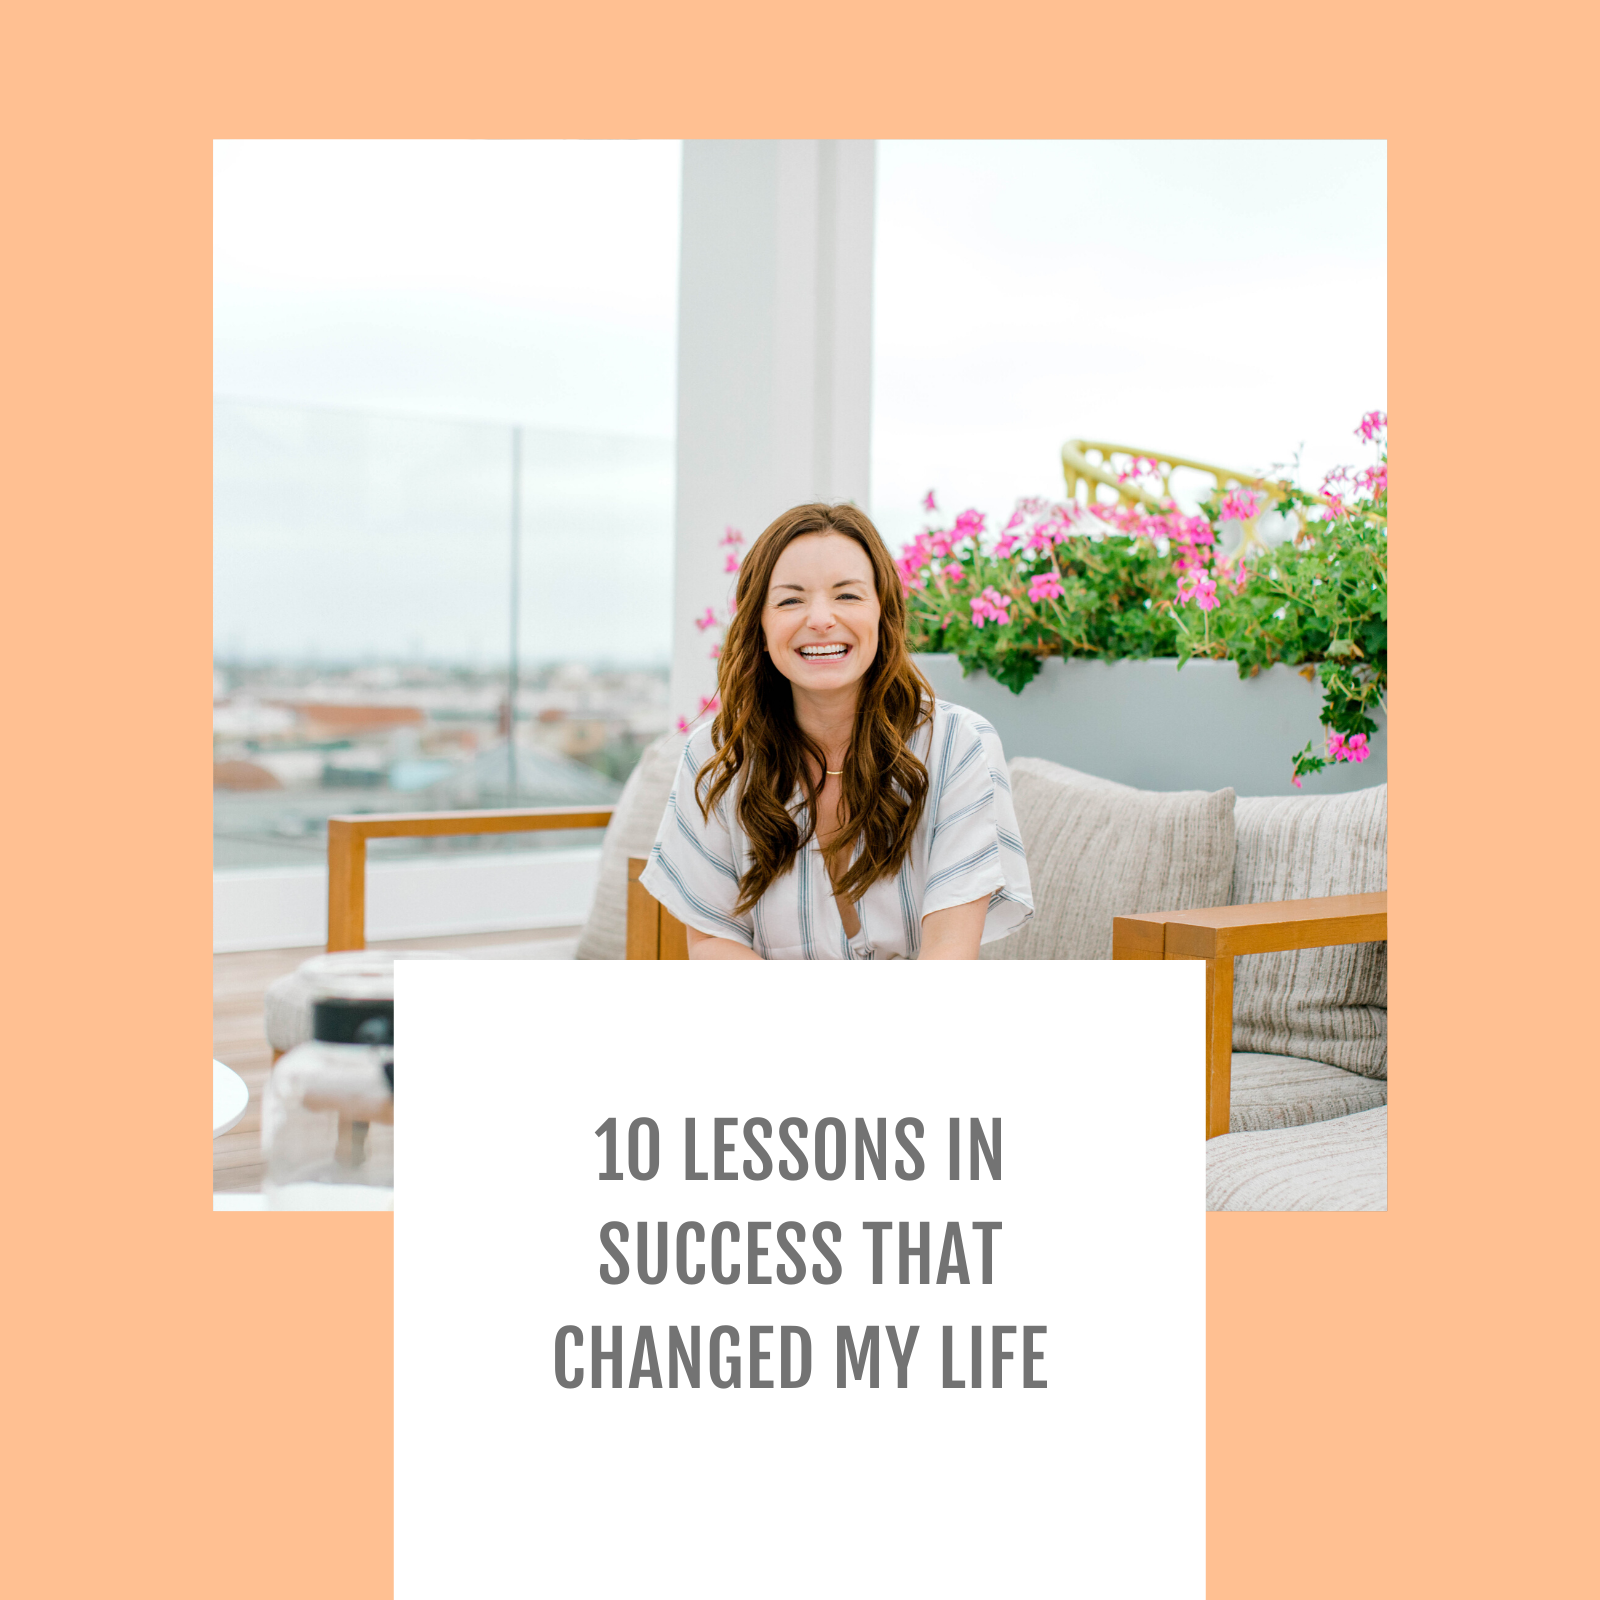  Episode #100 - 10 lessons in success that changed my life